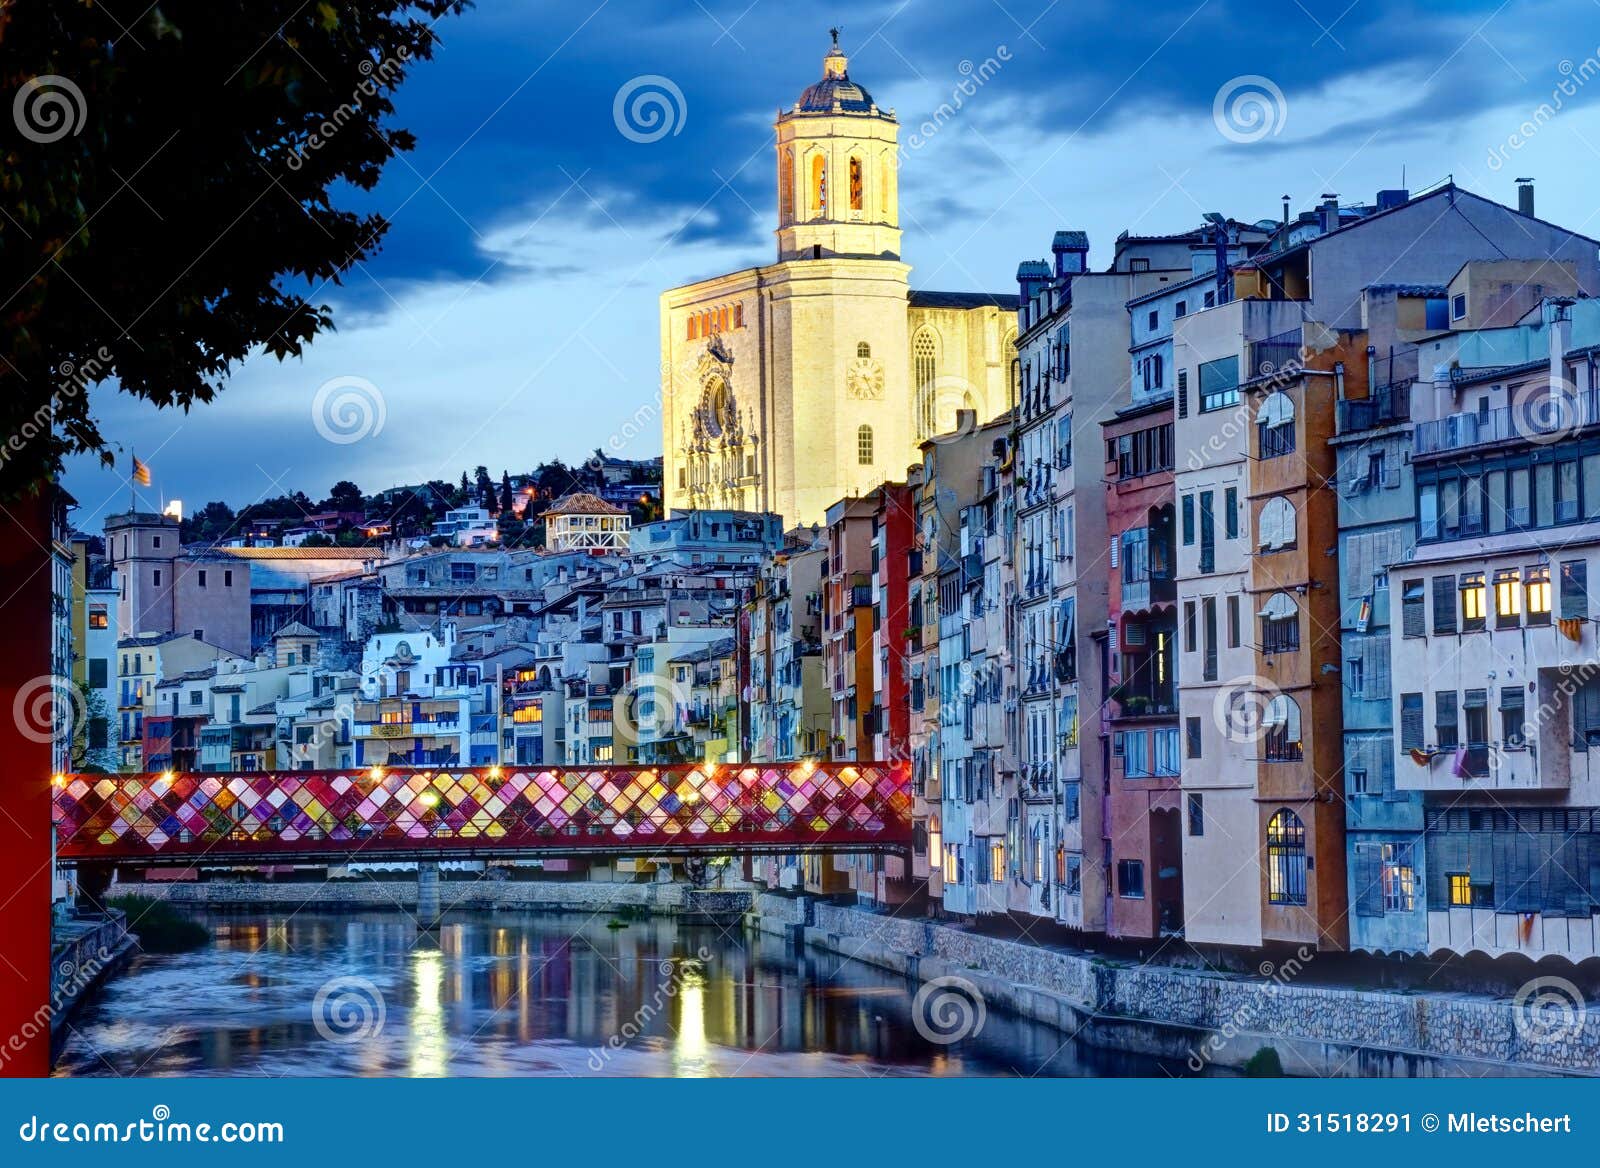 gerona, spain, cathedral and old-town by night